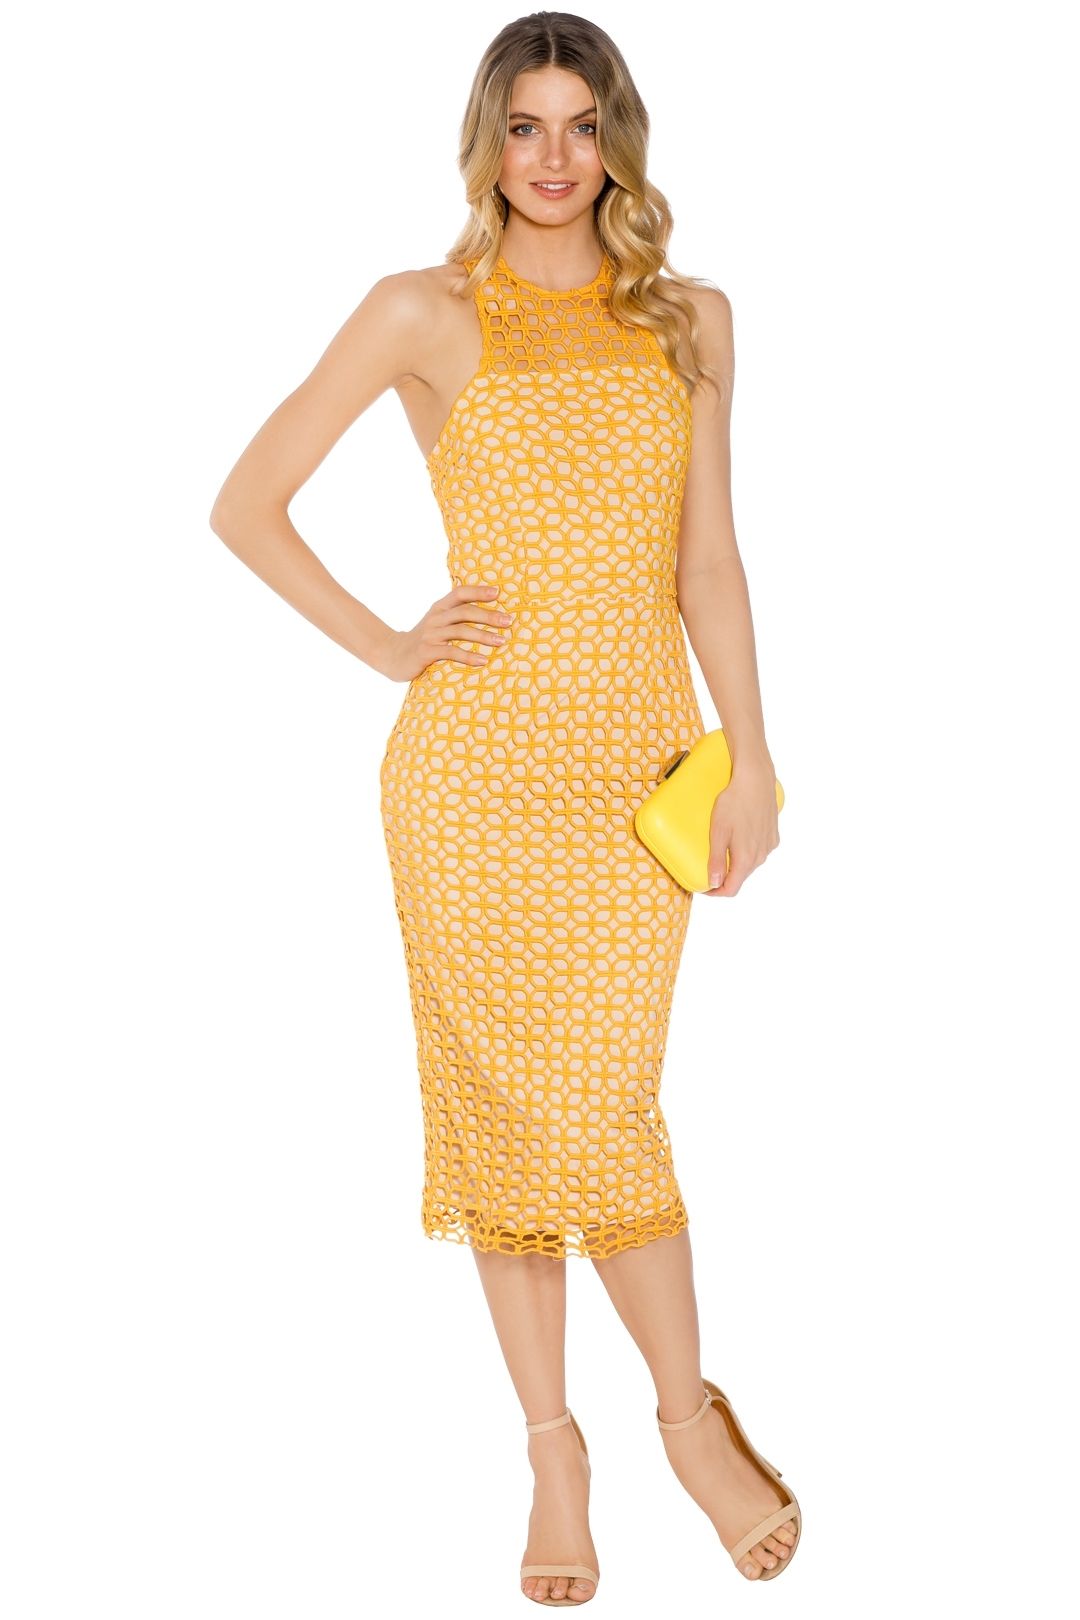 Karlie High Neck Lace Dress in Marigold by Cooper St for Hire